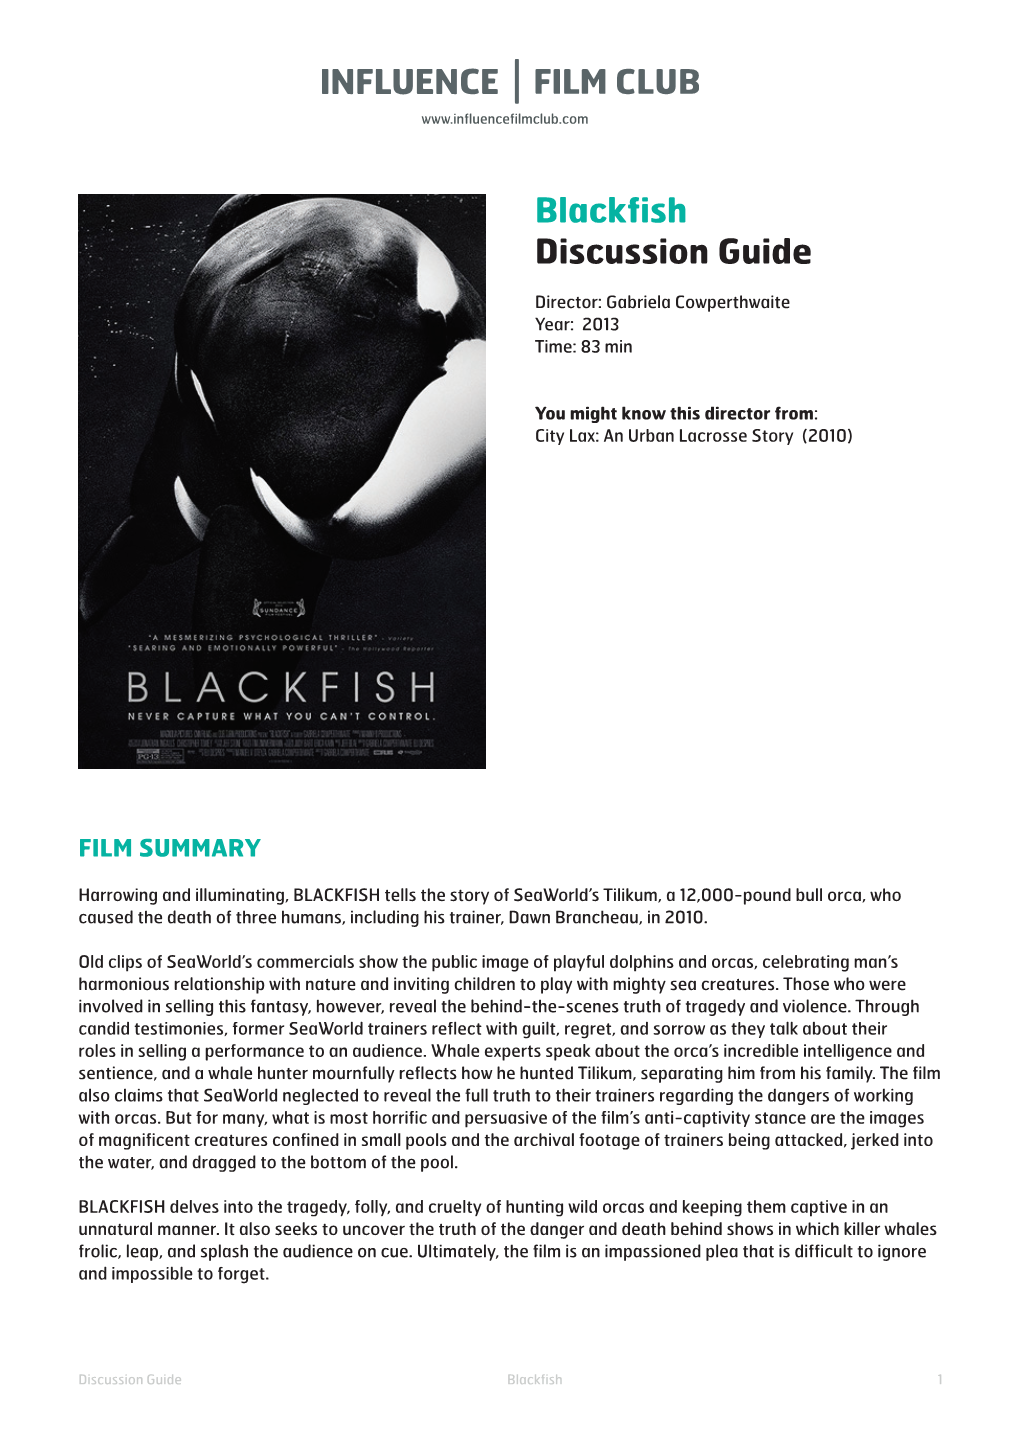 Blackfish Discussion Guide